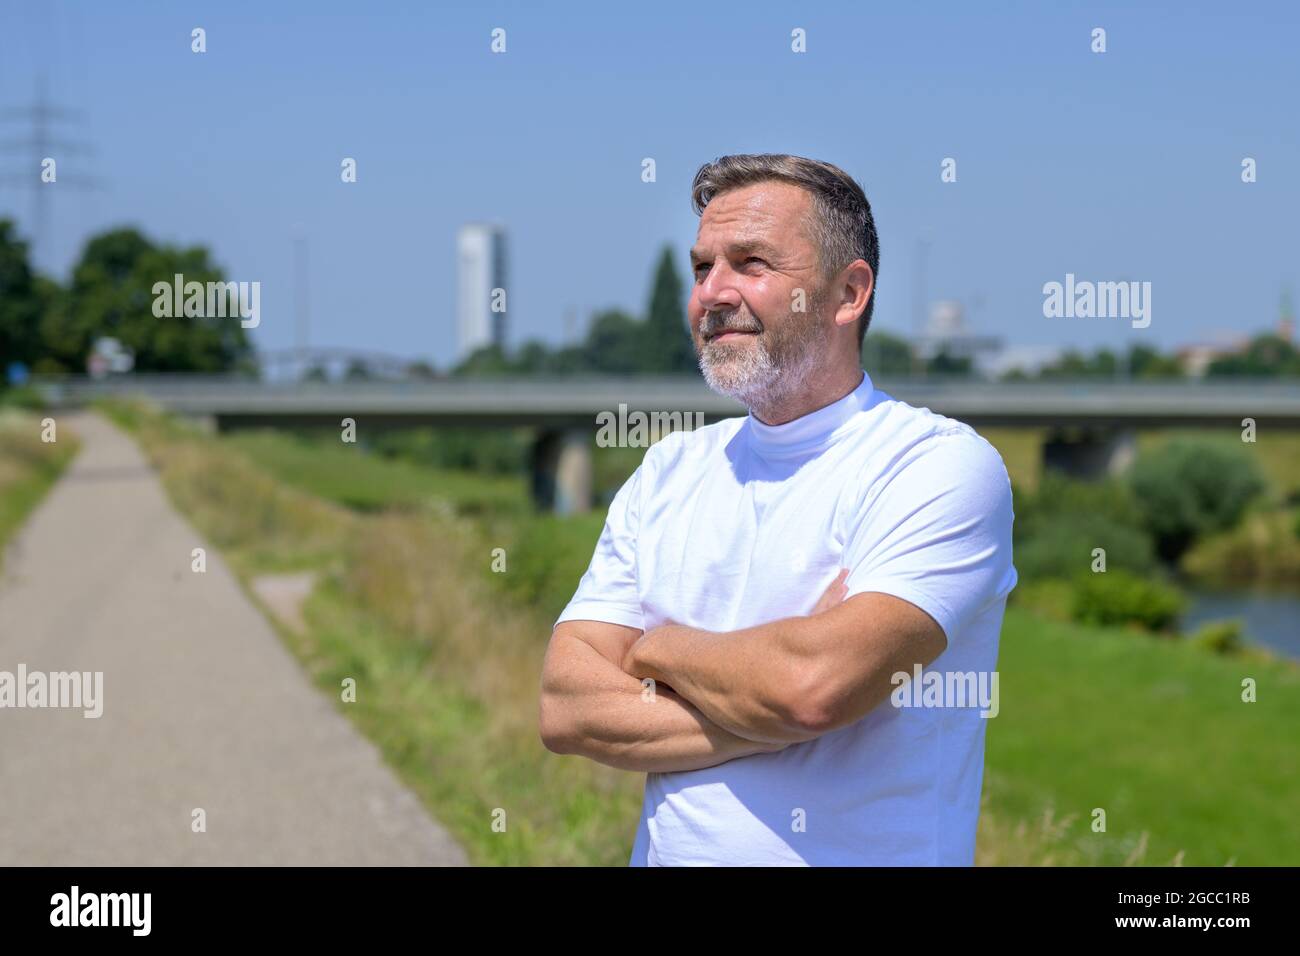 Thoughtful elderly man standing with folded arms staring up into a sunny sky on a rural footpath alongside a river in an upper body view Stock Photo